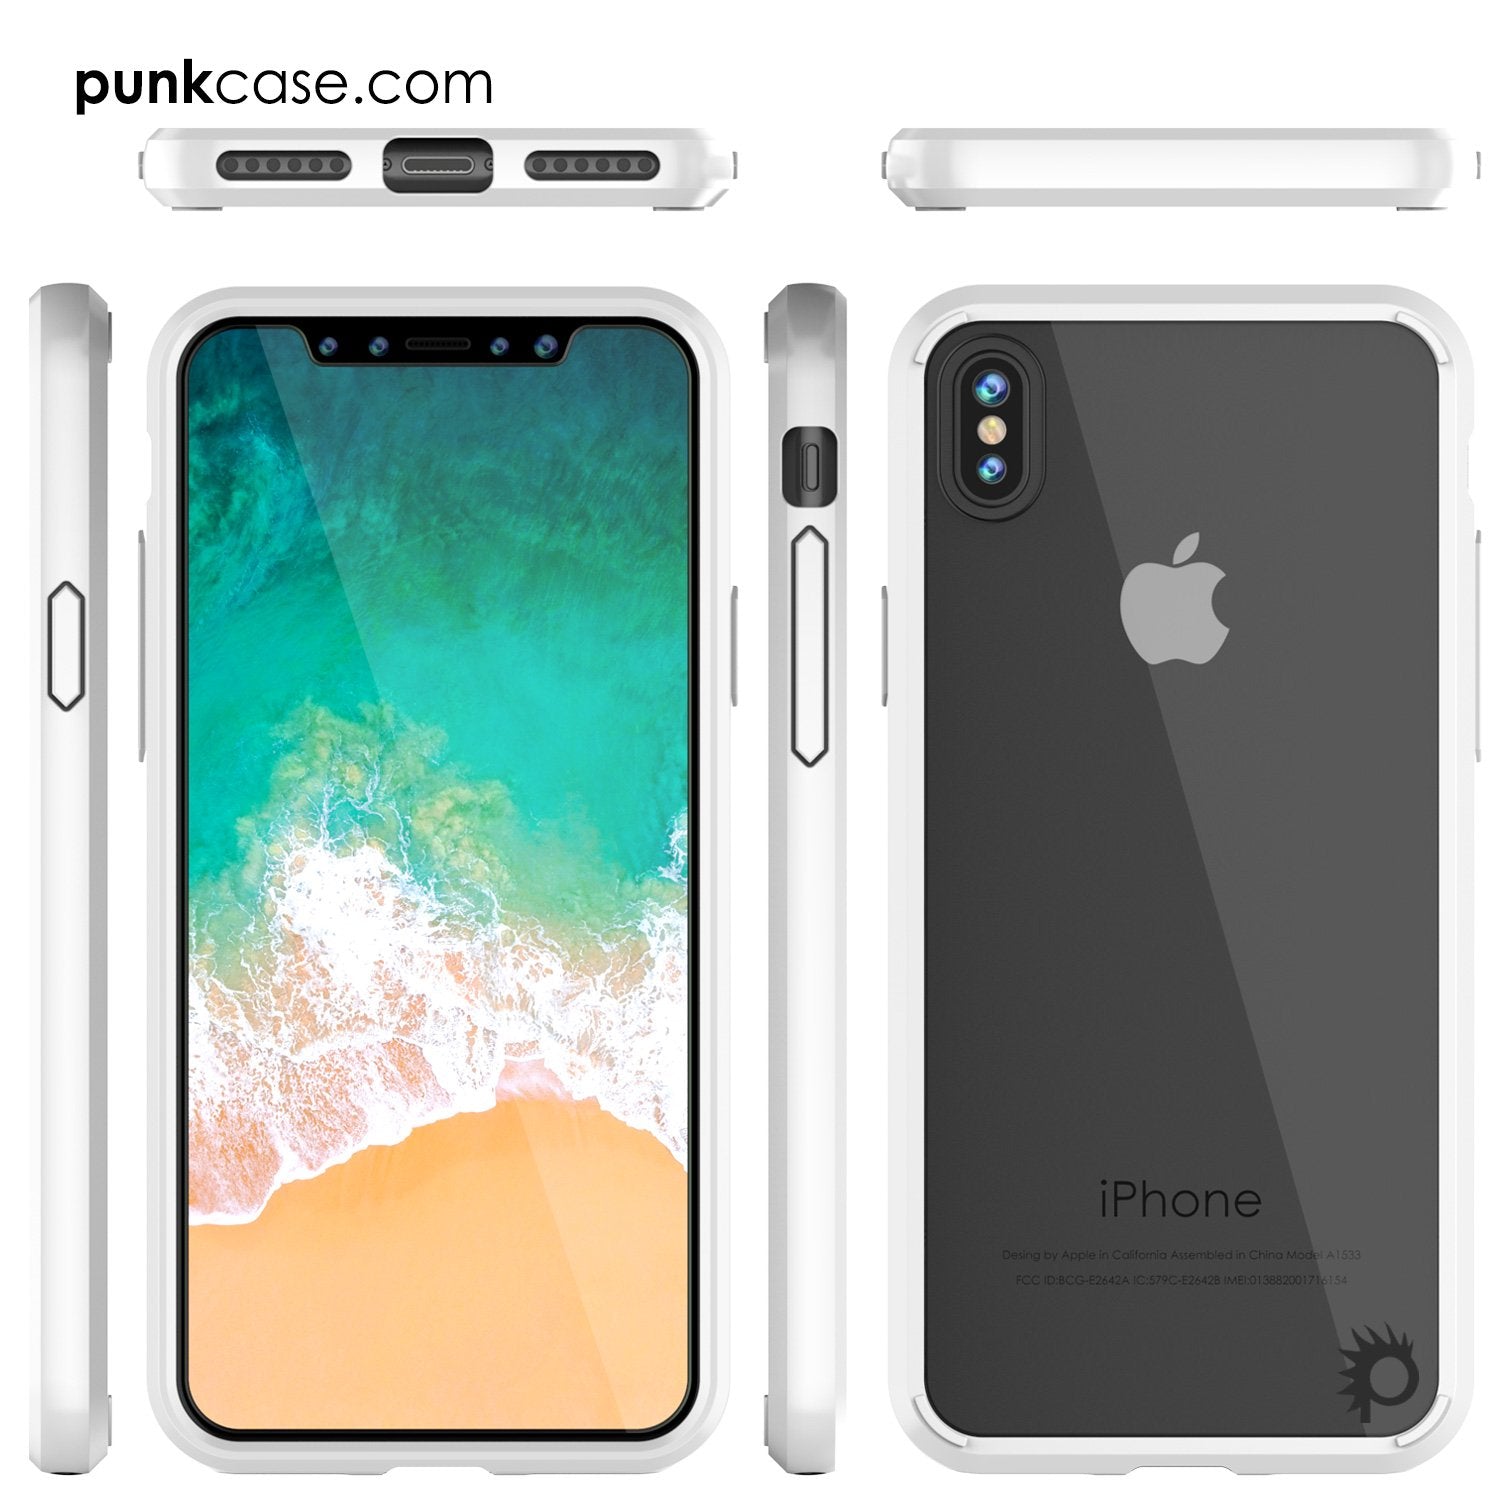 iPhone X Case, PUNKcase [LUCID 2.0 Series] [Slim Fit] Armor Cover W/Integrated Anti-Shock System & Tempered Glass PUNKSHIELD Screen Protector [White]